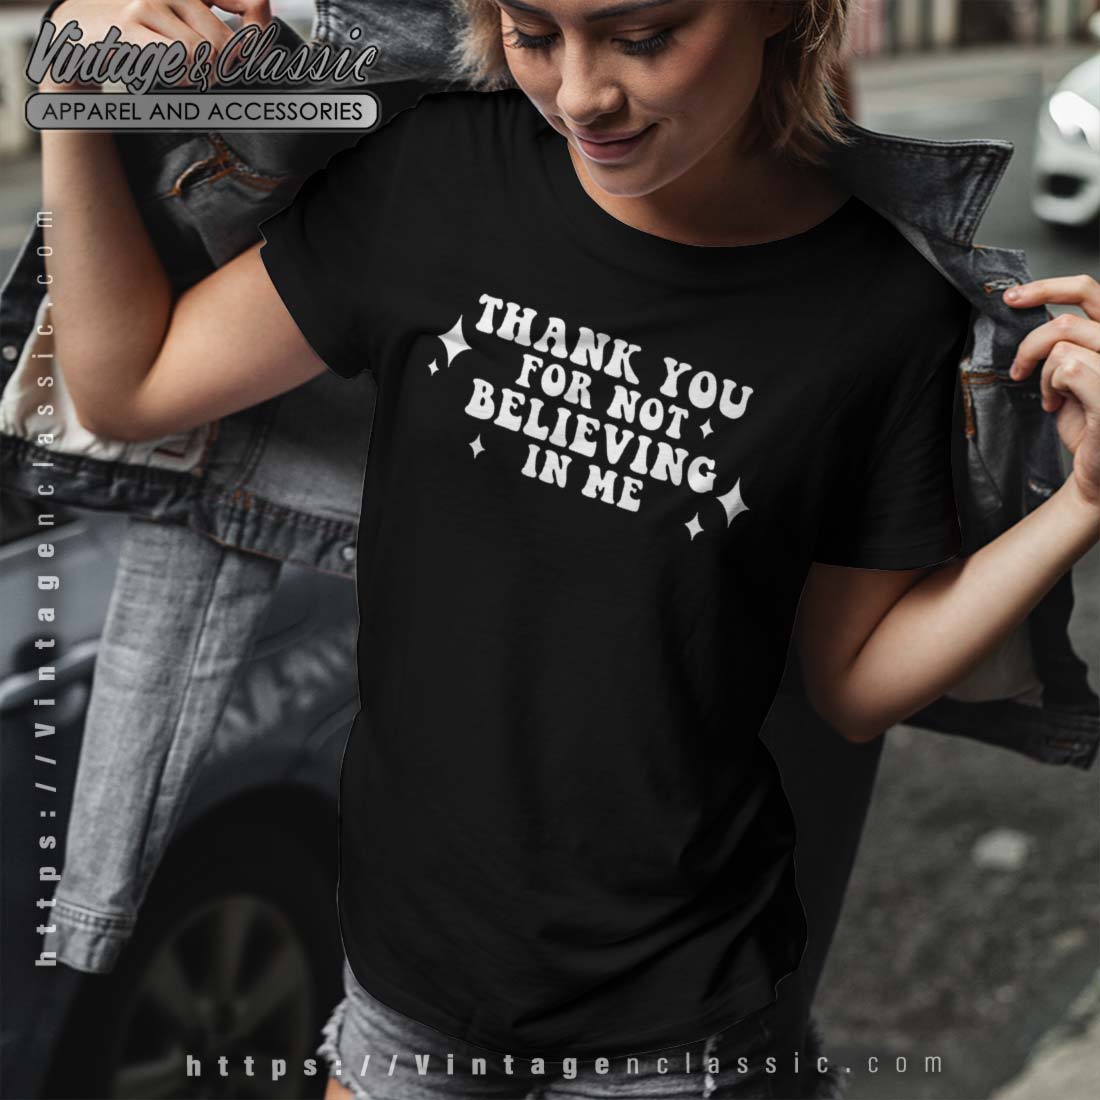 Thank You For Not Believing In Me Funny Tshirt